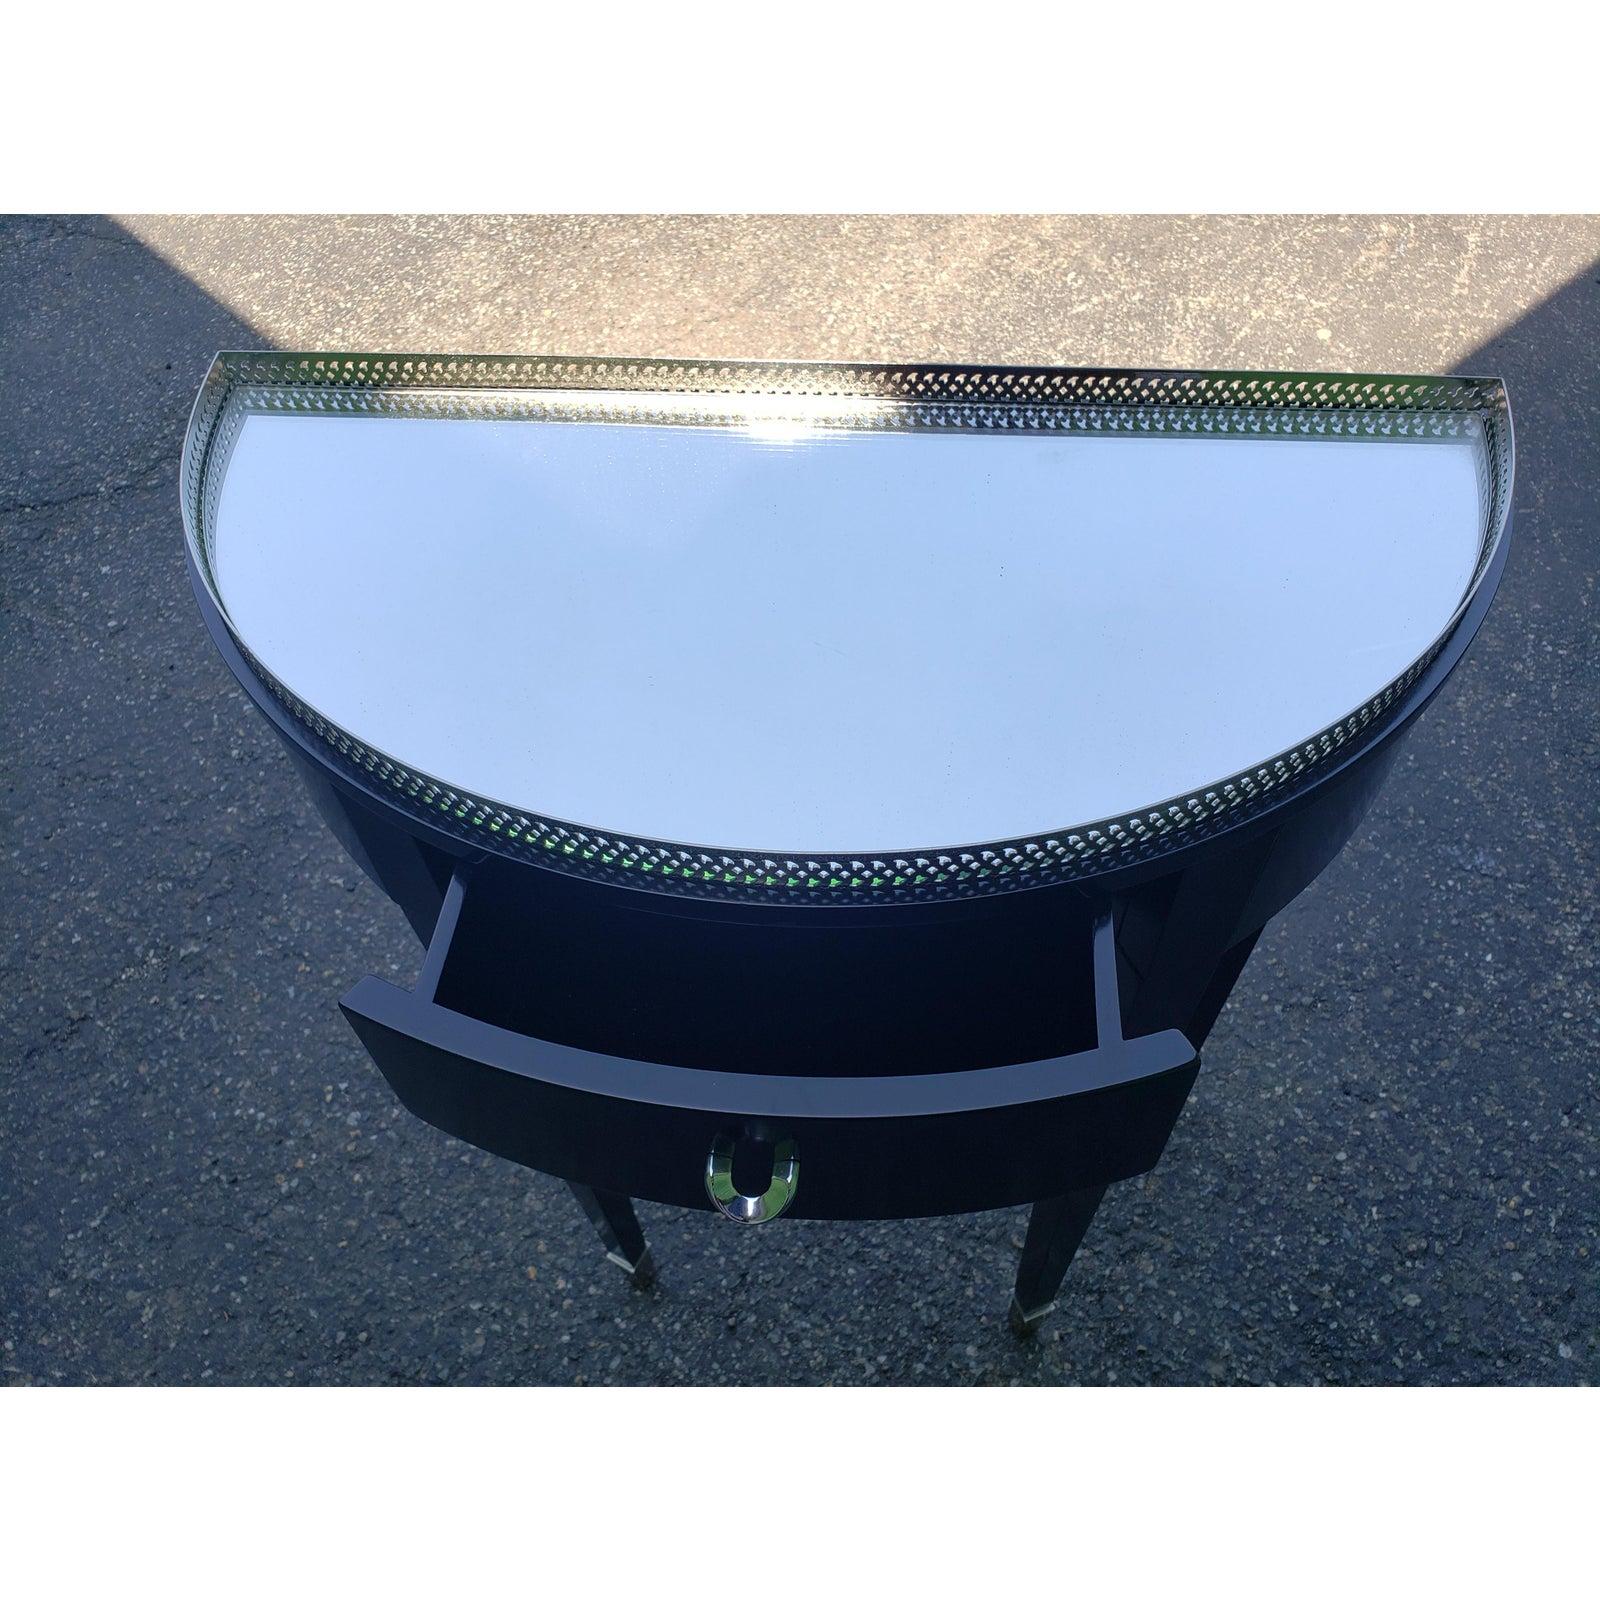 Contemporary foyer table with mirrored top. Mirror is removable. Maker unknown.
Beautiful ornate top edge with silver gallery and one front center drawer and silver metallic capped legs. Absolutely beautiful for any entrance or hall.
Measures: 24W